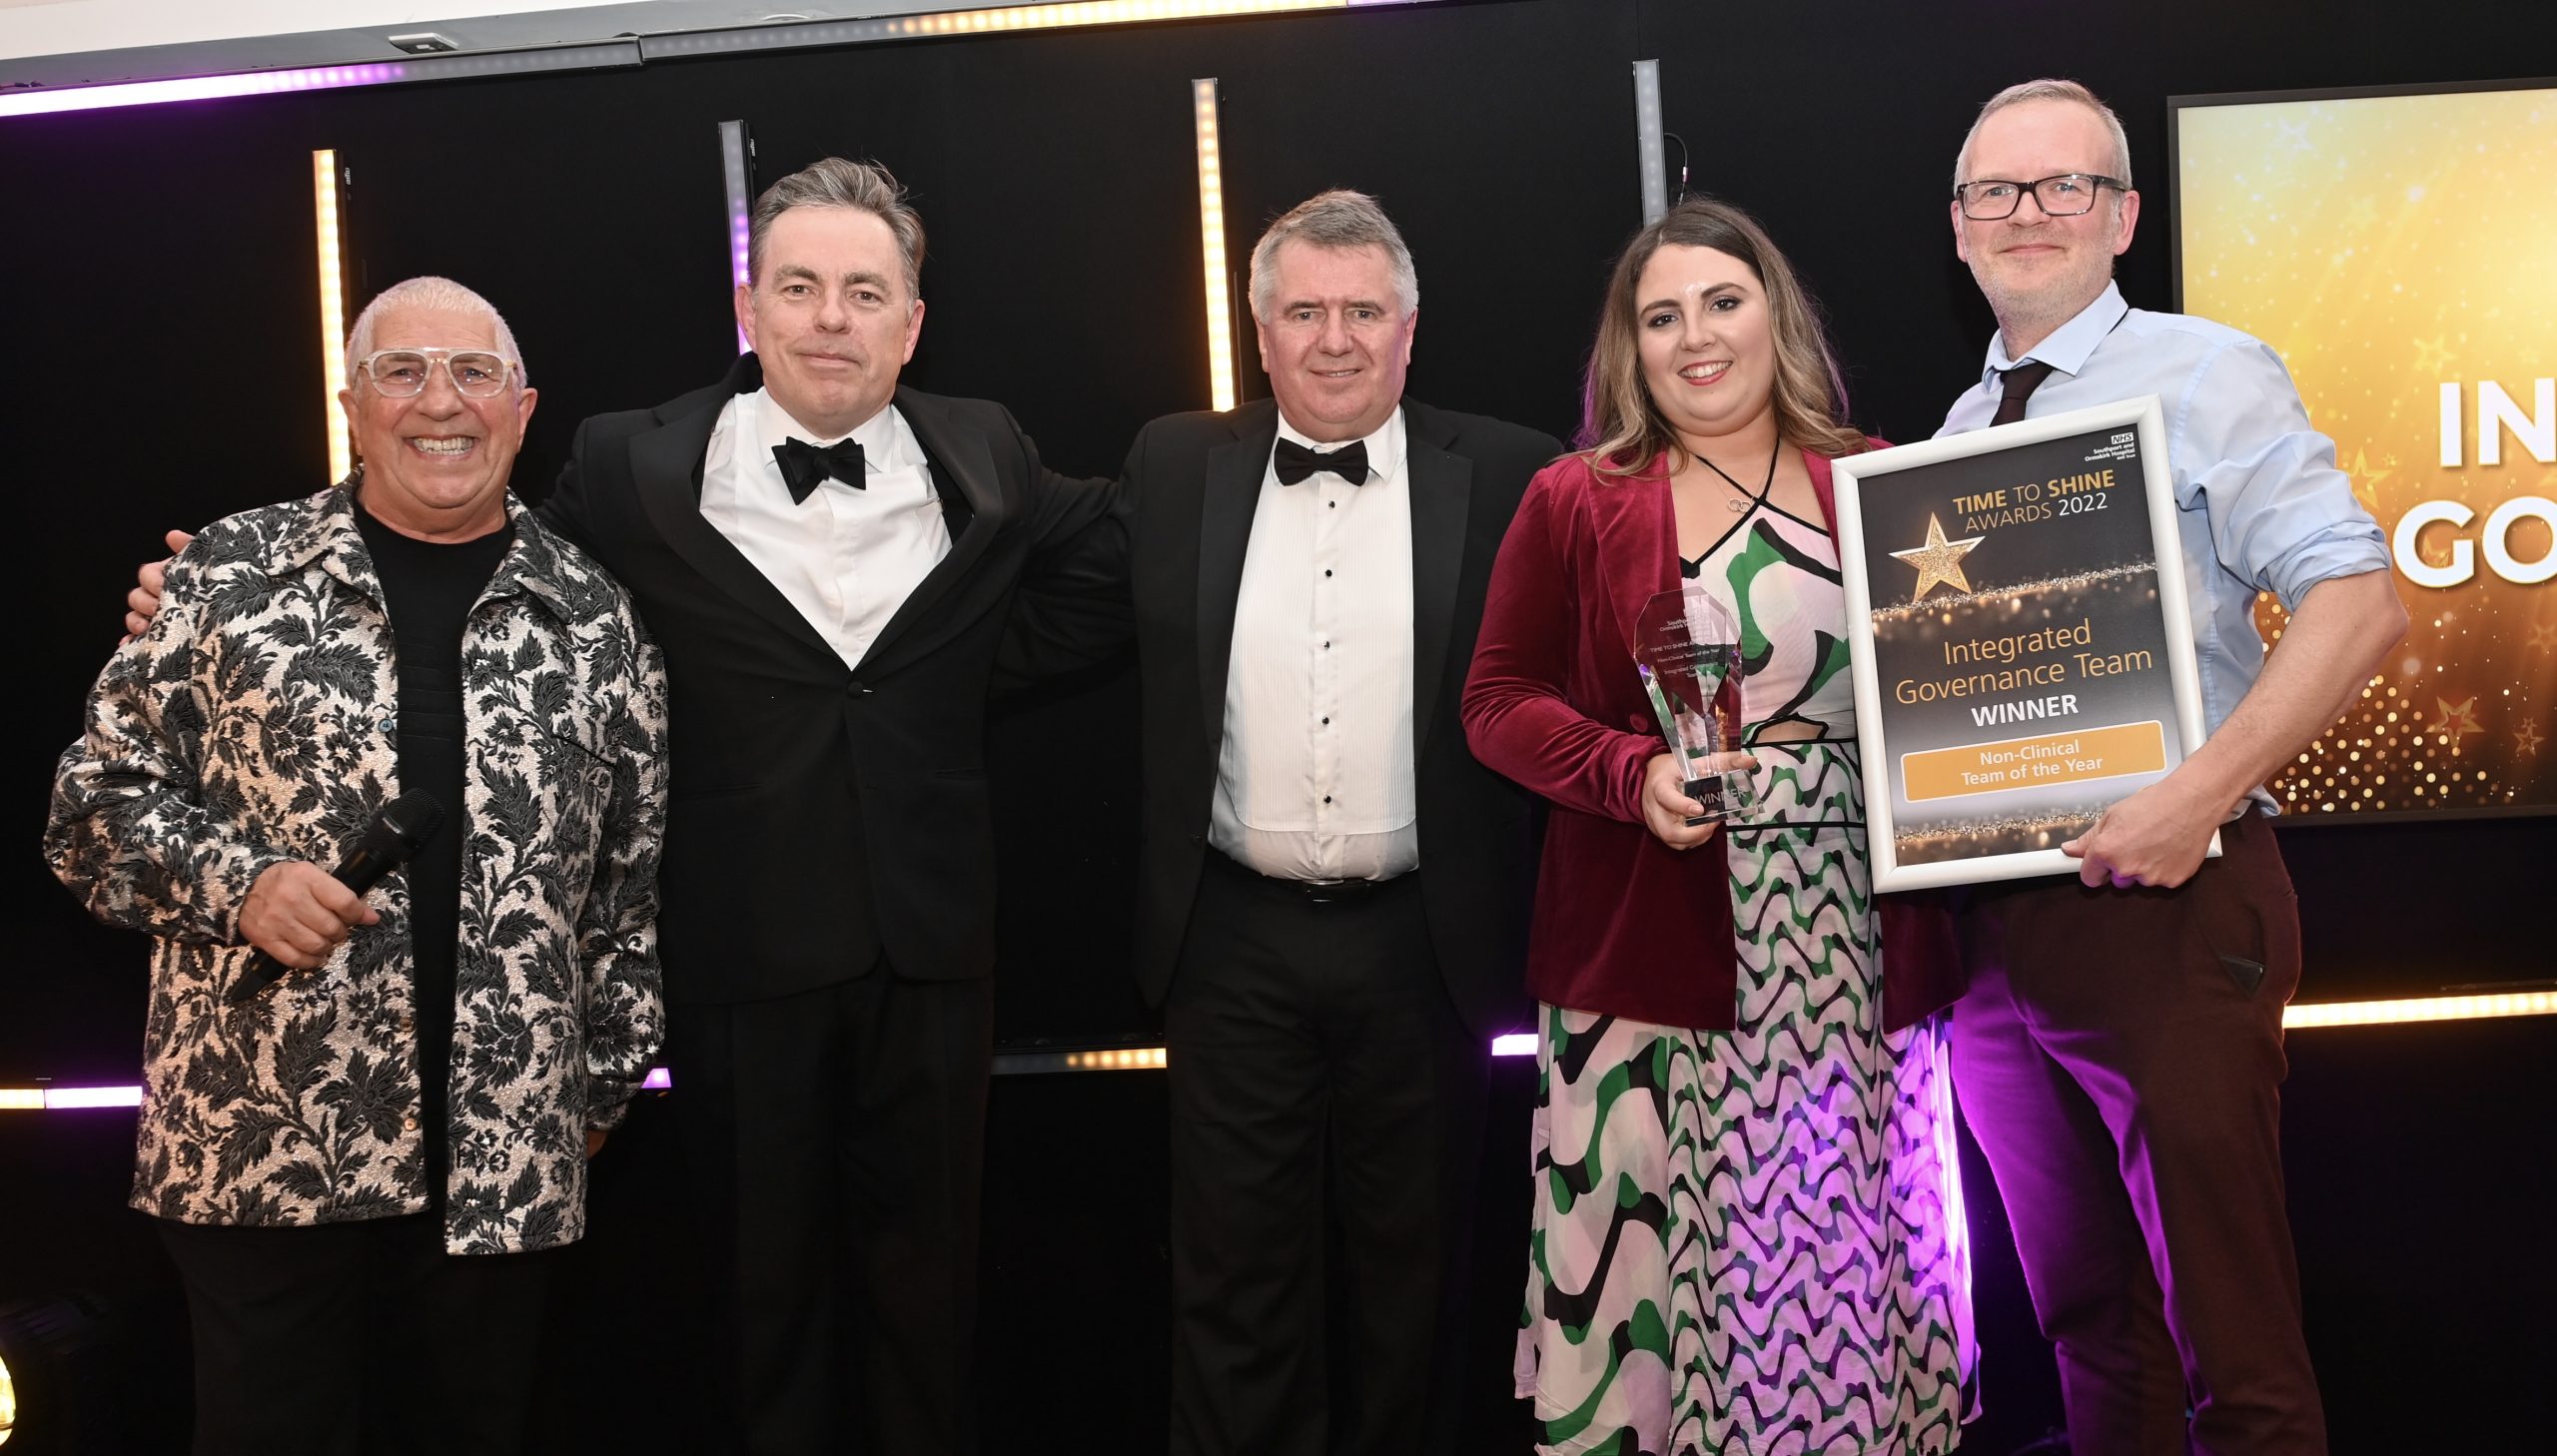 NHS heroes from across Southport and Ormskirk Hospital NHS Trust have been honoured at the 2022 Time to Shine Awards. The Integrated Governance Team won the Non-Clinical Team of The Year award